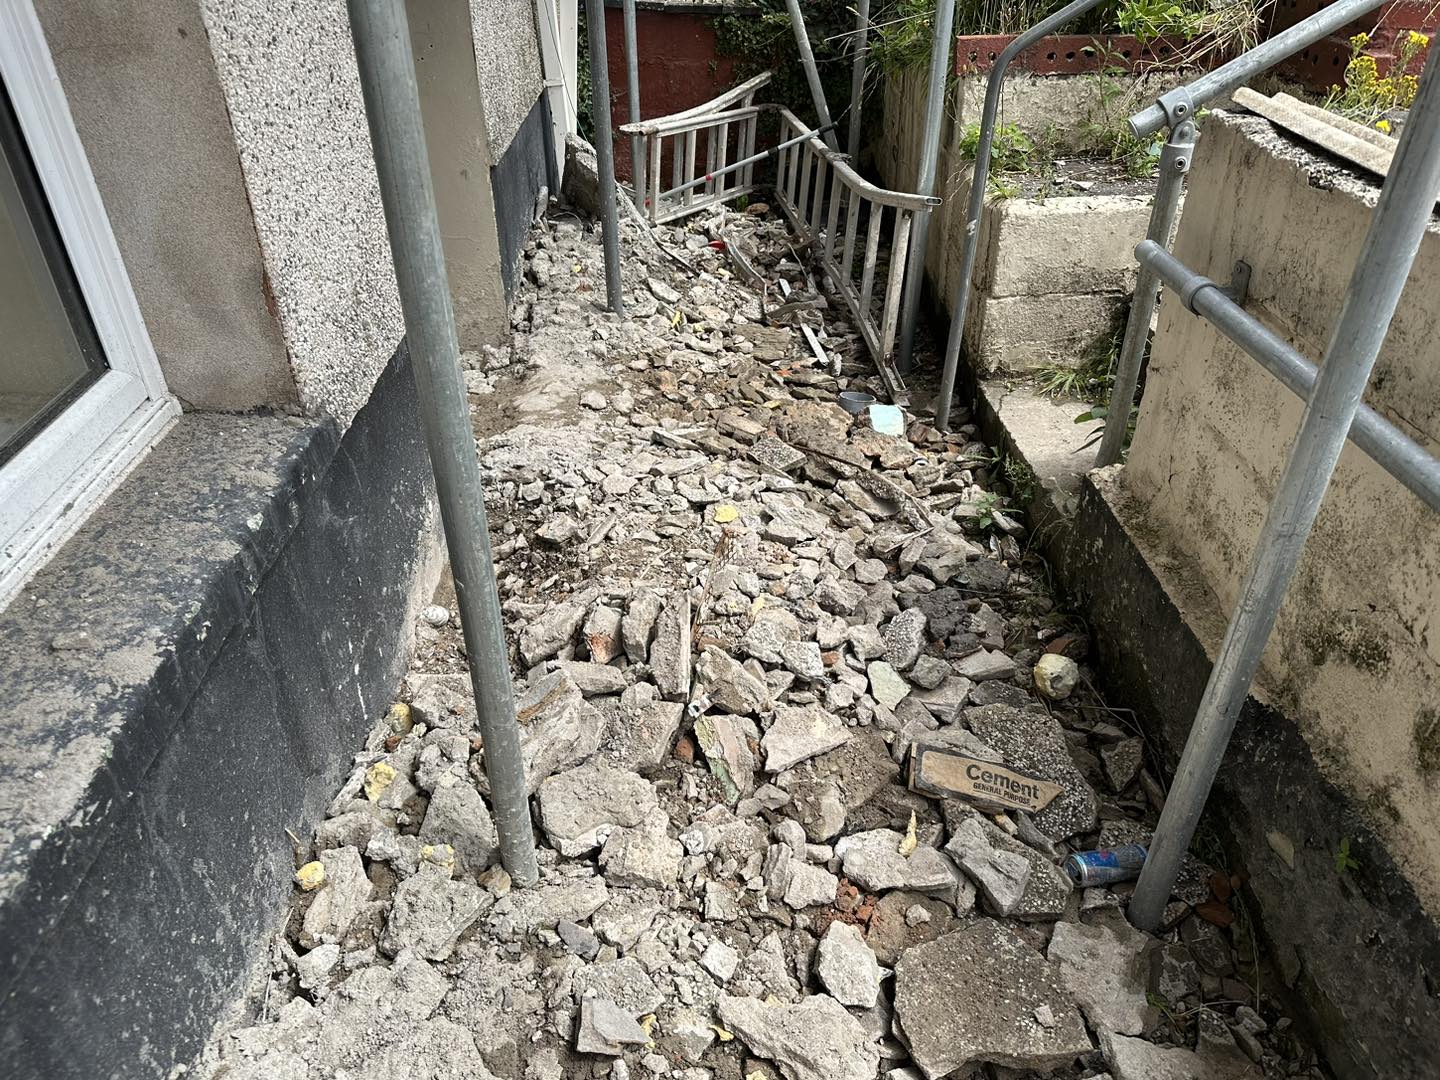 A photo of debris on the floor outside